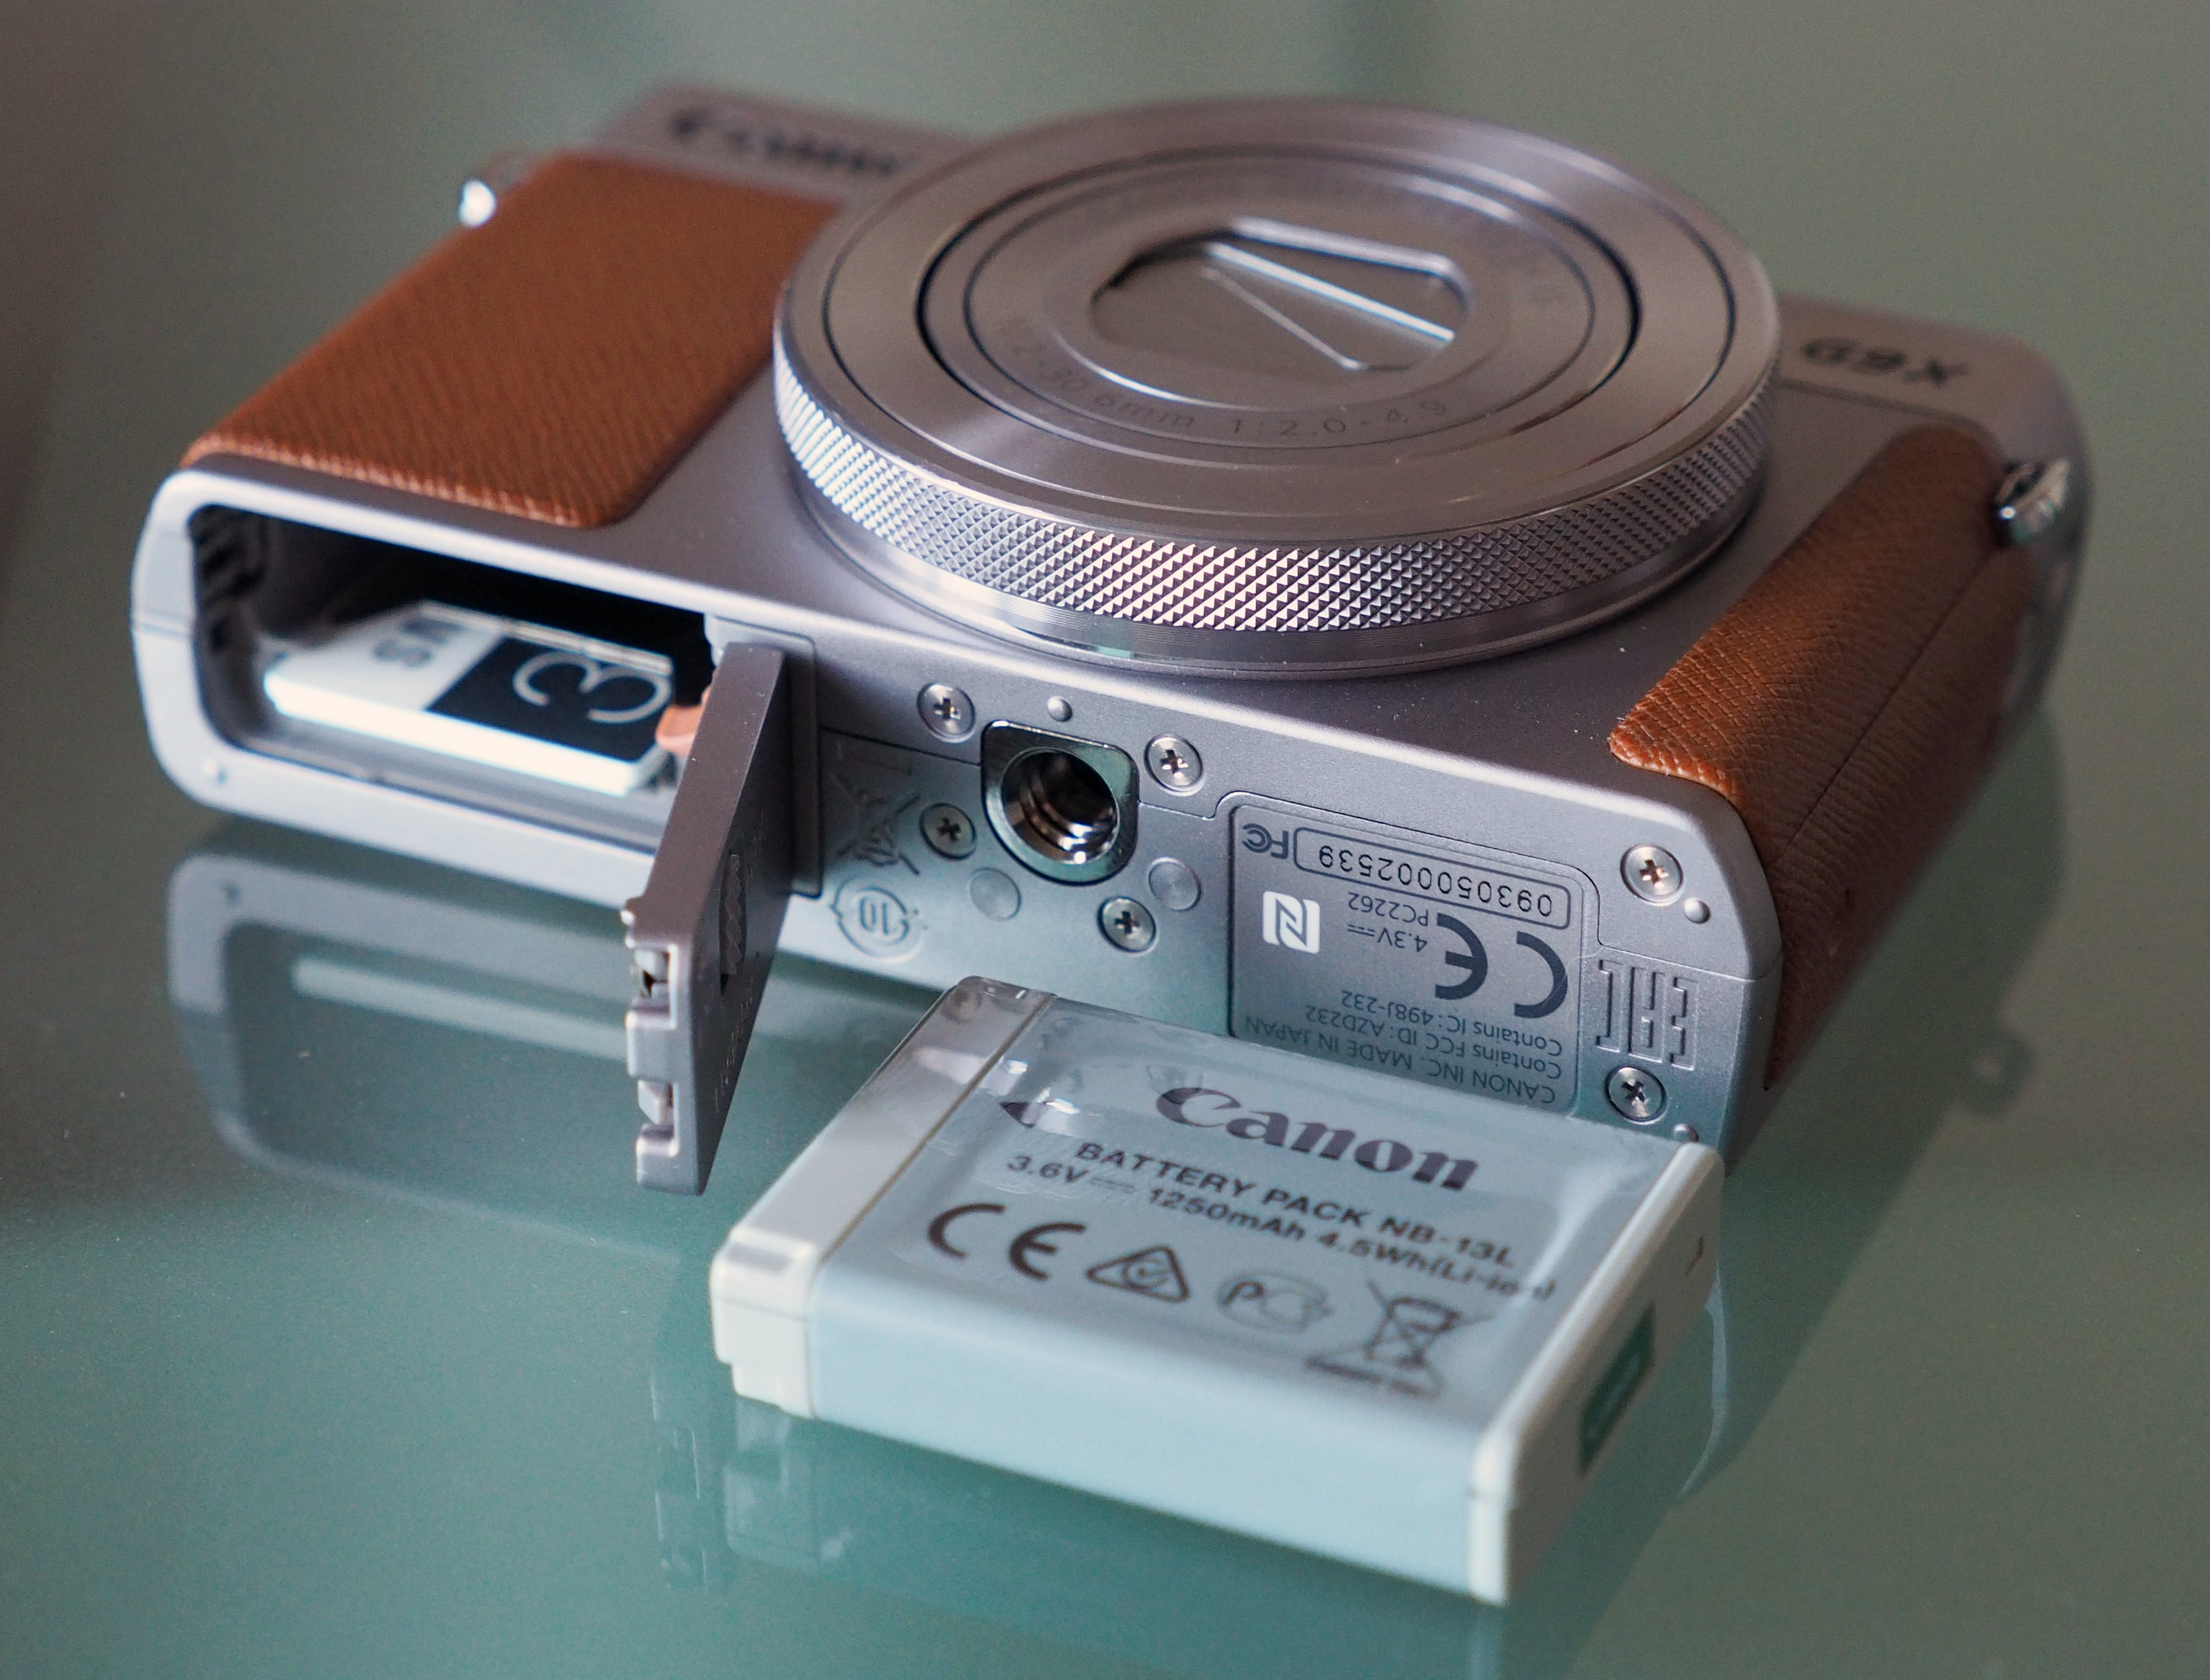 Canon PowerShot G9 X Capturing Moments with Precision and Style